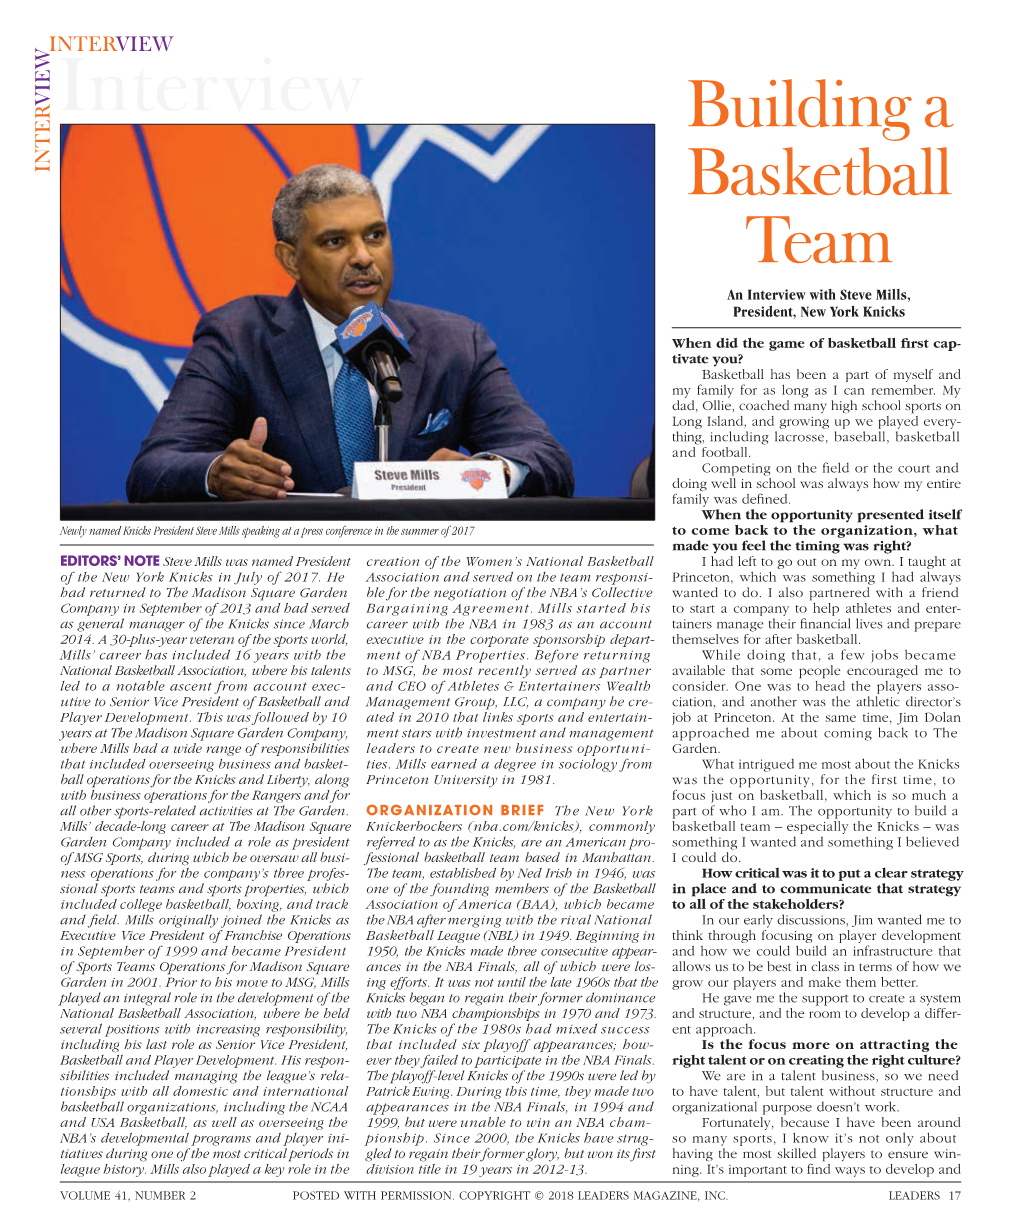 To Download a PDF of an Interview with Steve Mills, President, New York Knicks